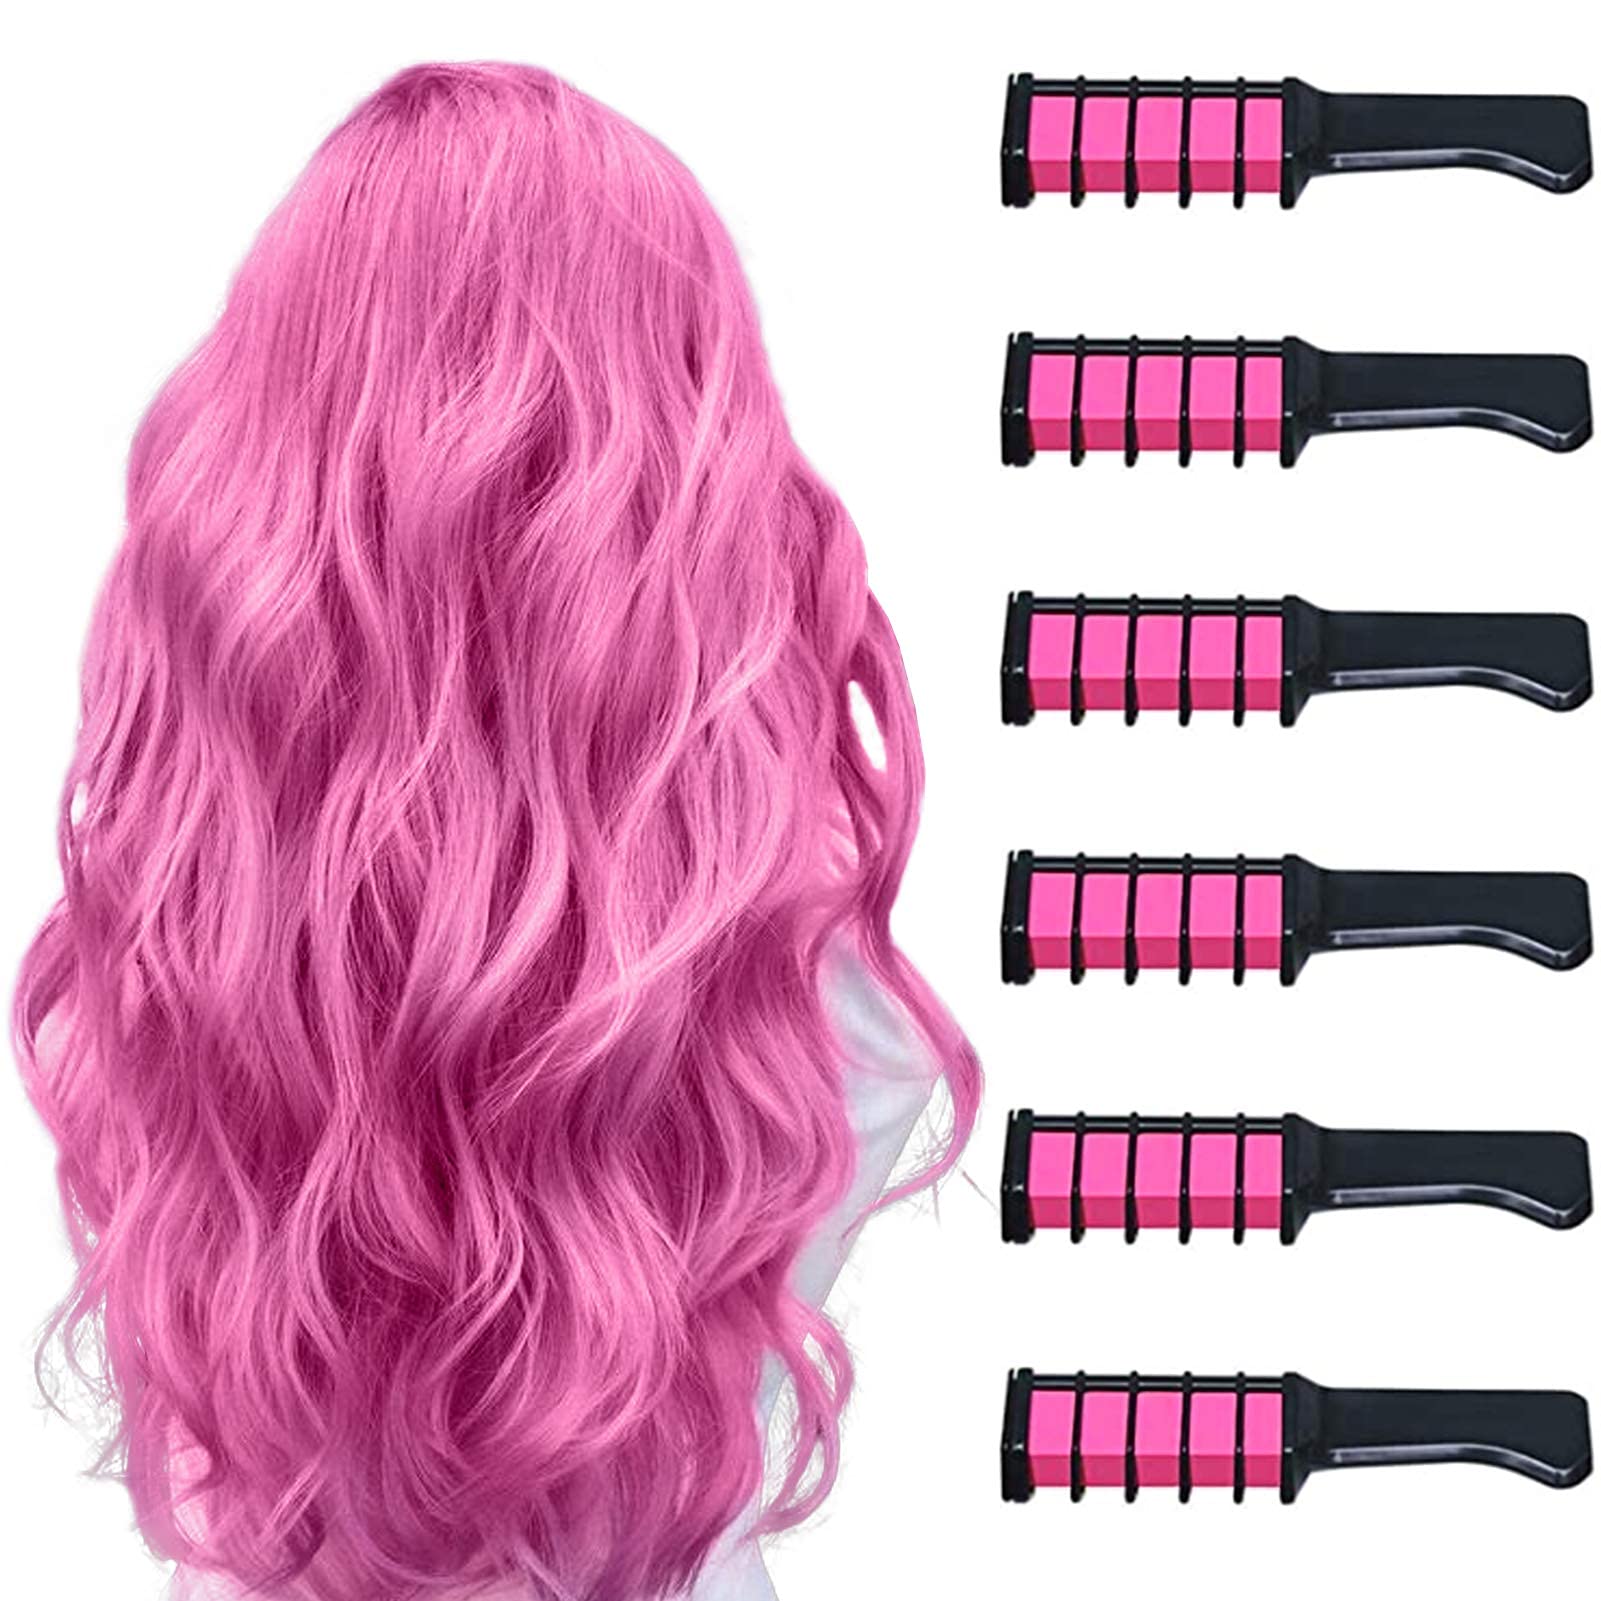 6PC Pink Mini Hair Chalk For Girls Gifts Washable Bright Hair Chalk Combs Temporary  Hair Color for Age 4 5 6 7 8 9 10 Festival Party Cosplay Dress up  Halloween, Christmas New Years Birthday (Pink)